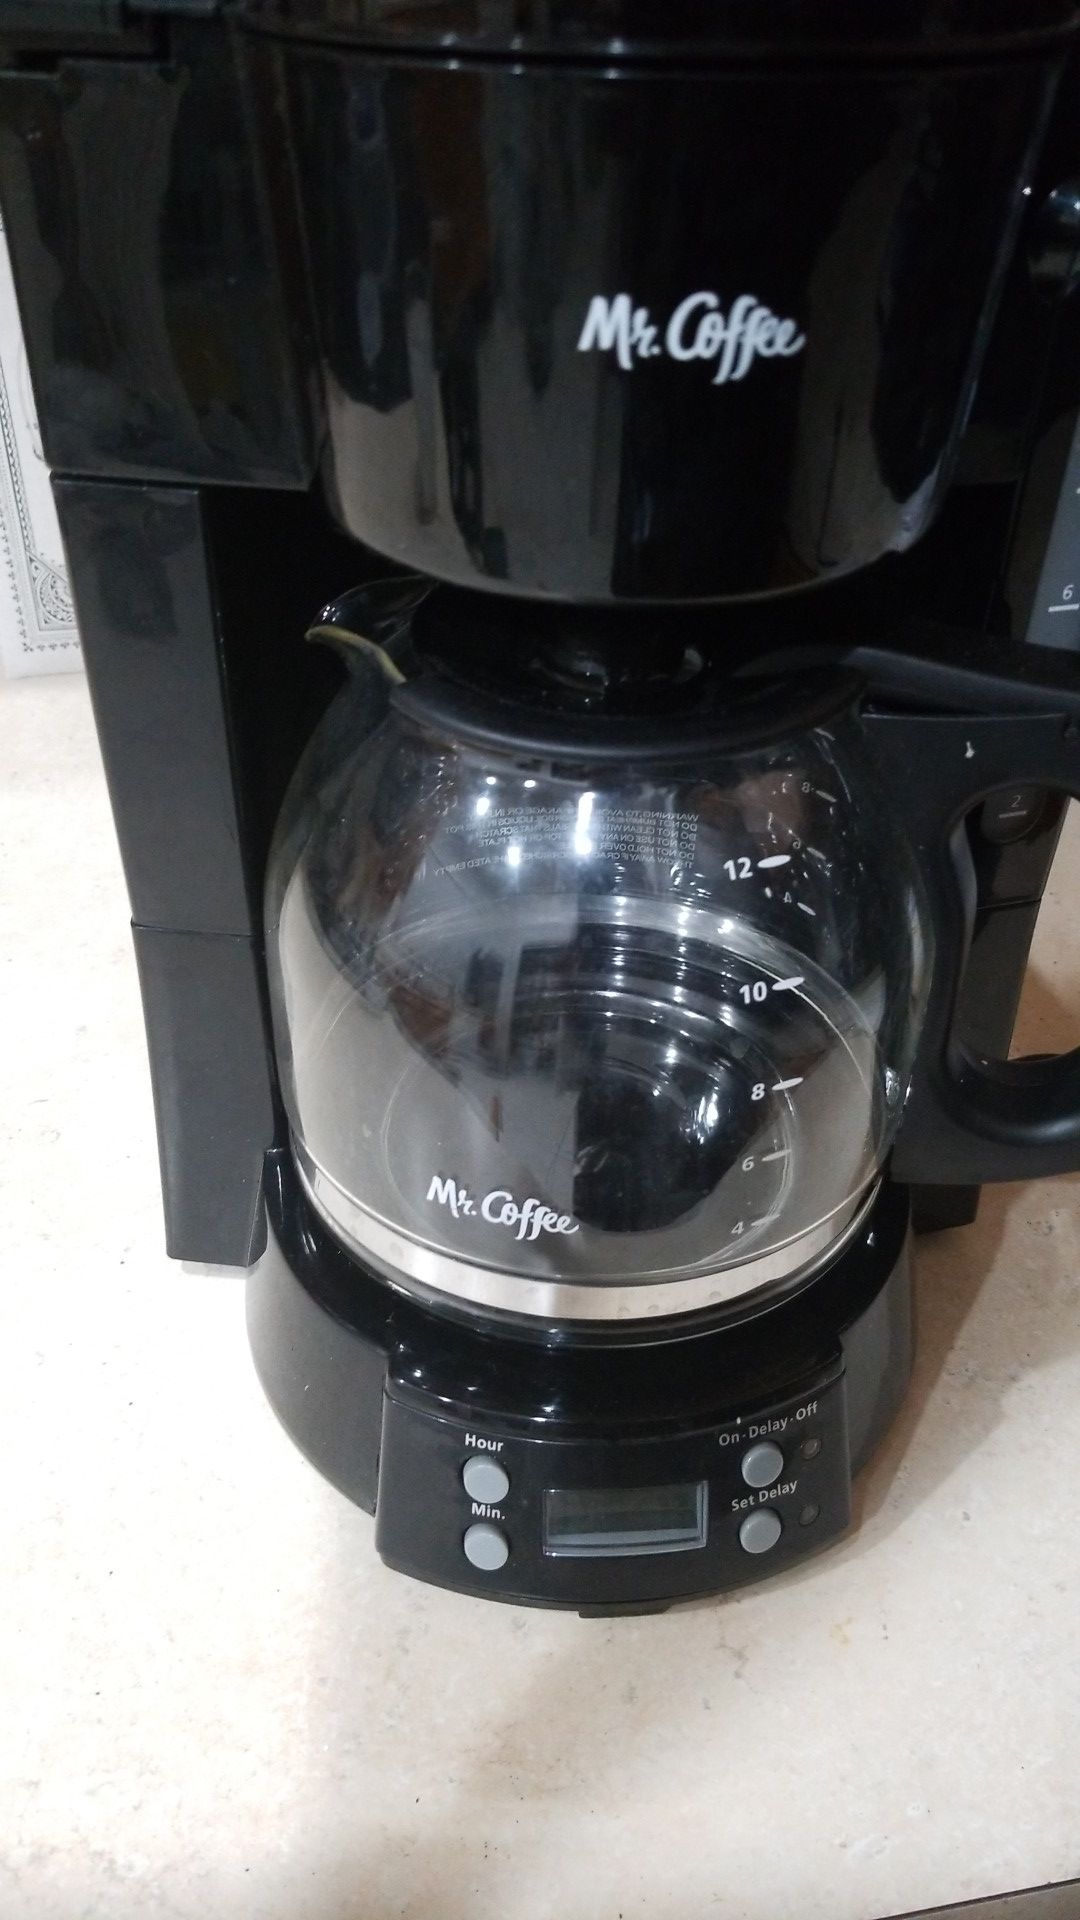 12 cup Coffee maker